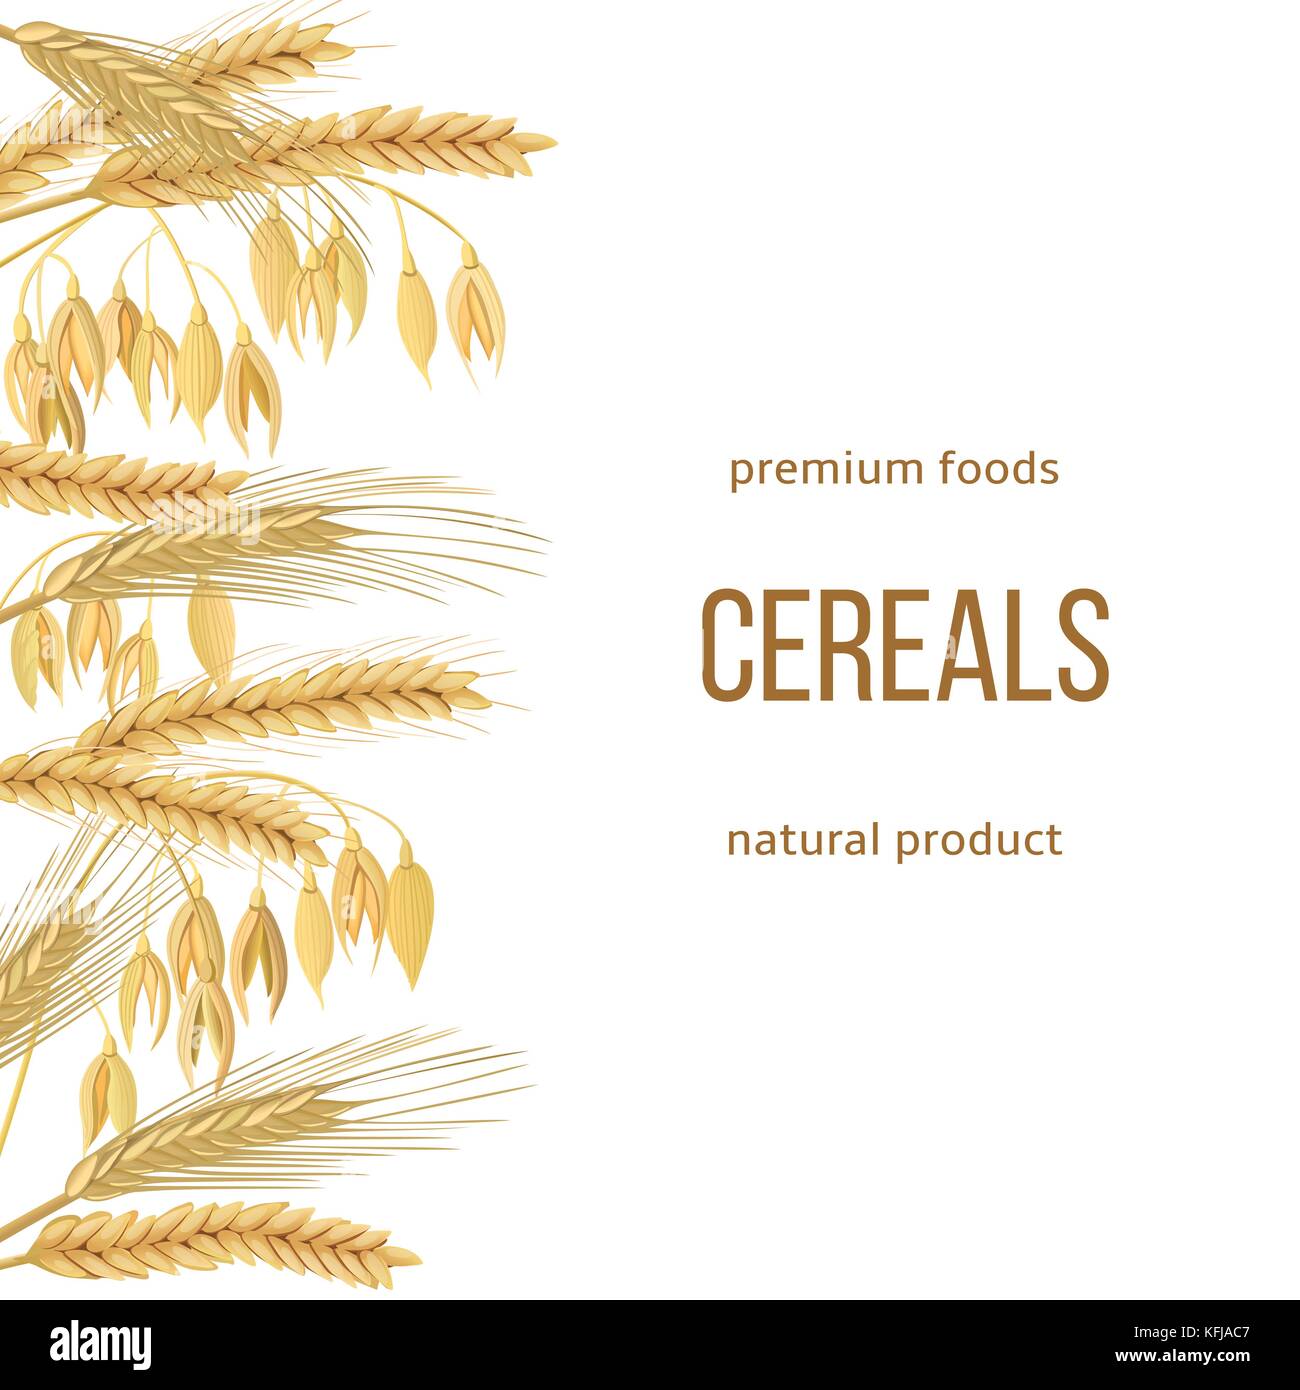 Wheat, barley, oat and rye set. text premium foods, natural product. Four cereals grains with ears, sheaf Stock Vector